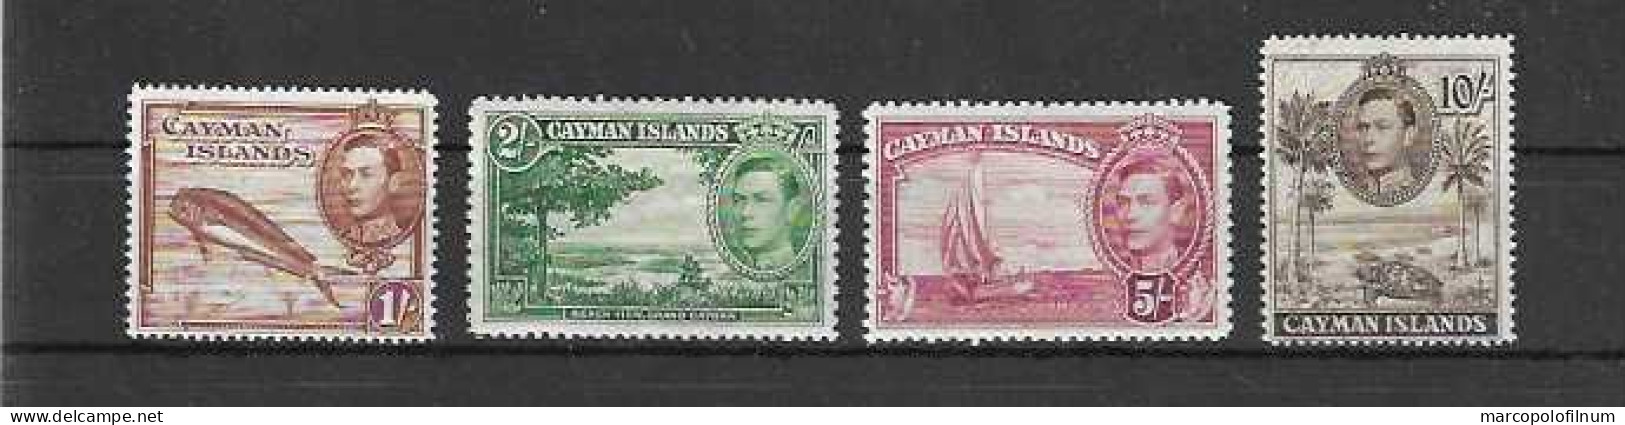 1938 - CAYMAN ISLANDS - CAT. ST.GIBBONS 123/126 - THE LAST VALUES OF THE SET - SLIGHTLY HINGED - - Cayman Islands